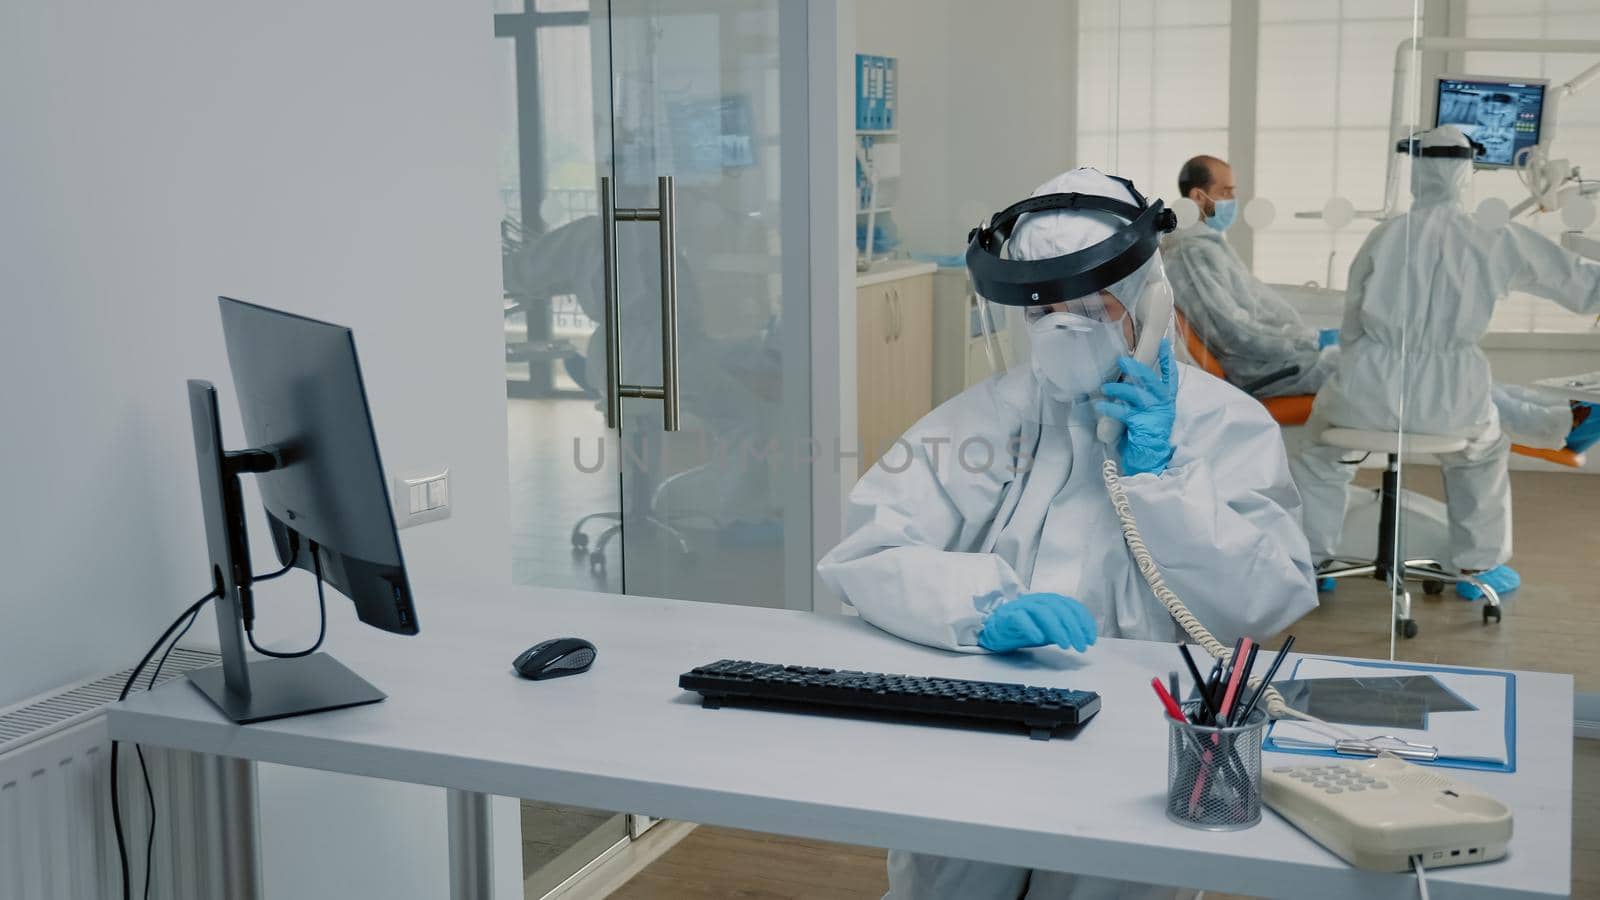 Dentistry nurse in protection suit sitting at desk using telephone and computer at dental clinic. Assistant working on appointments while stomatologist consulting patient in background